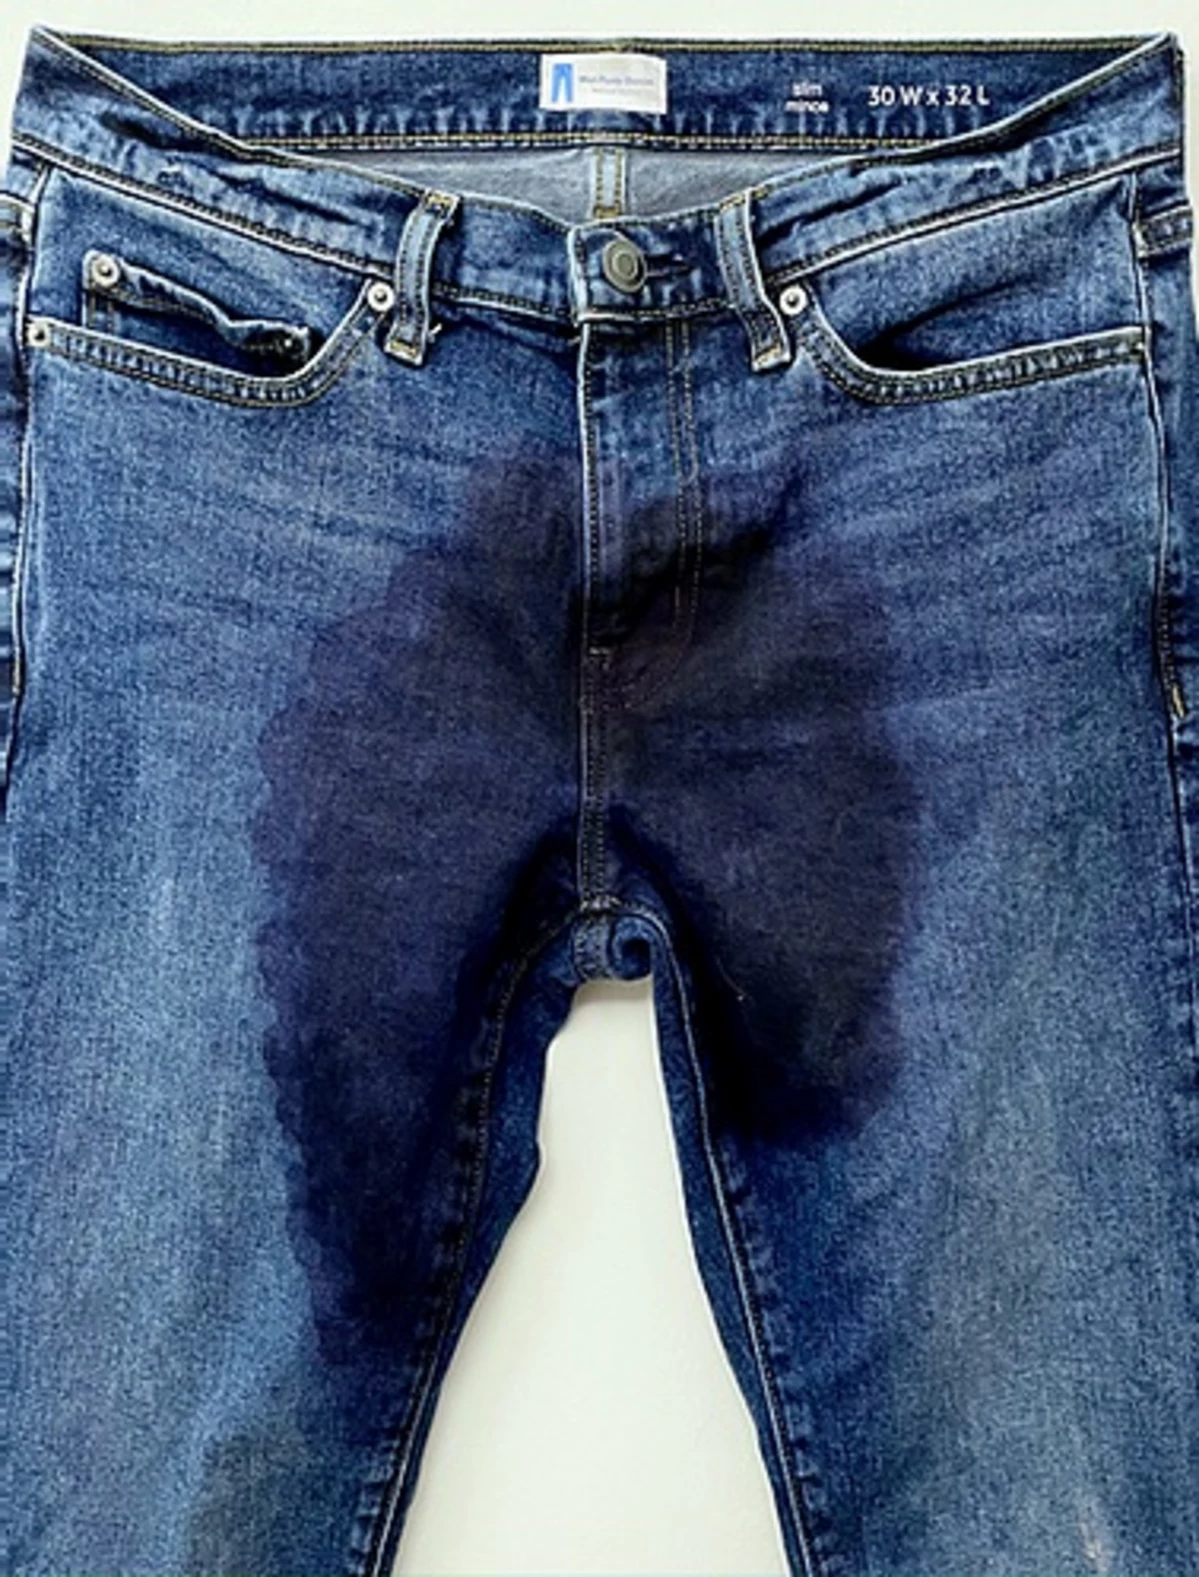 Wet Pants Fashion Trend Looks Like You Have No Bladder Control